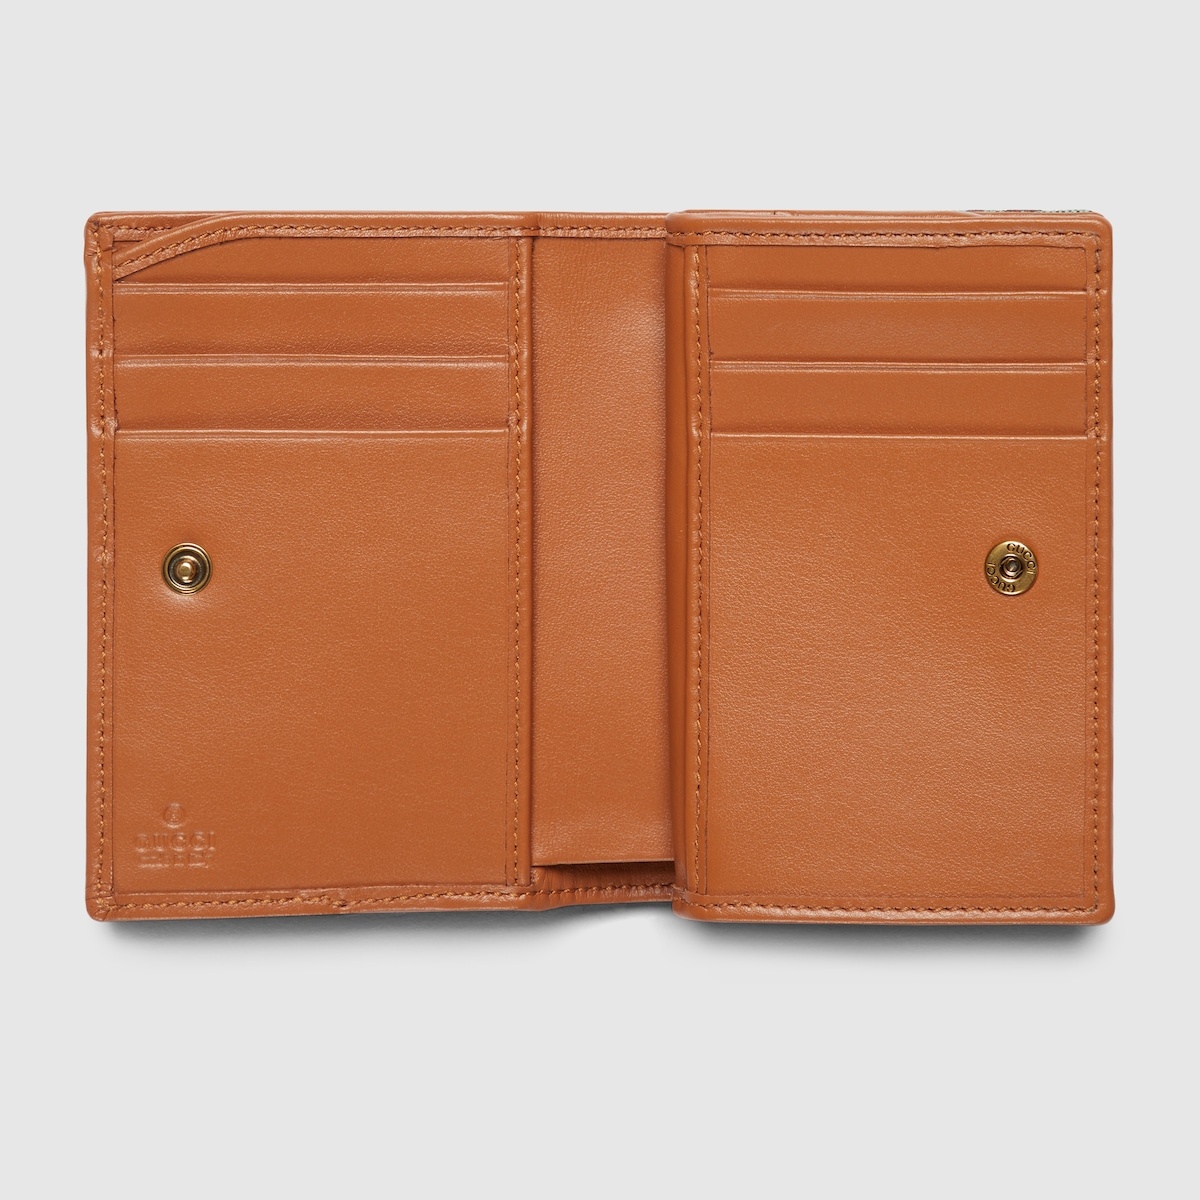 GG wallet with coin pocket - 2